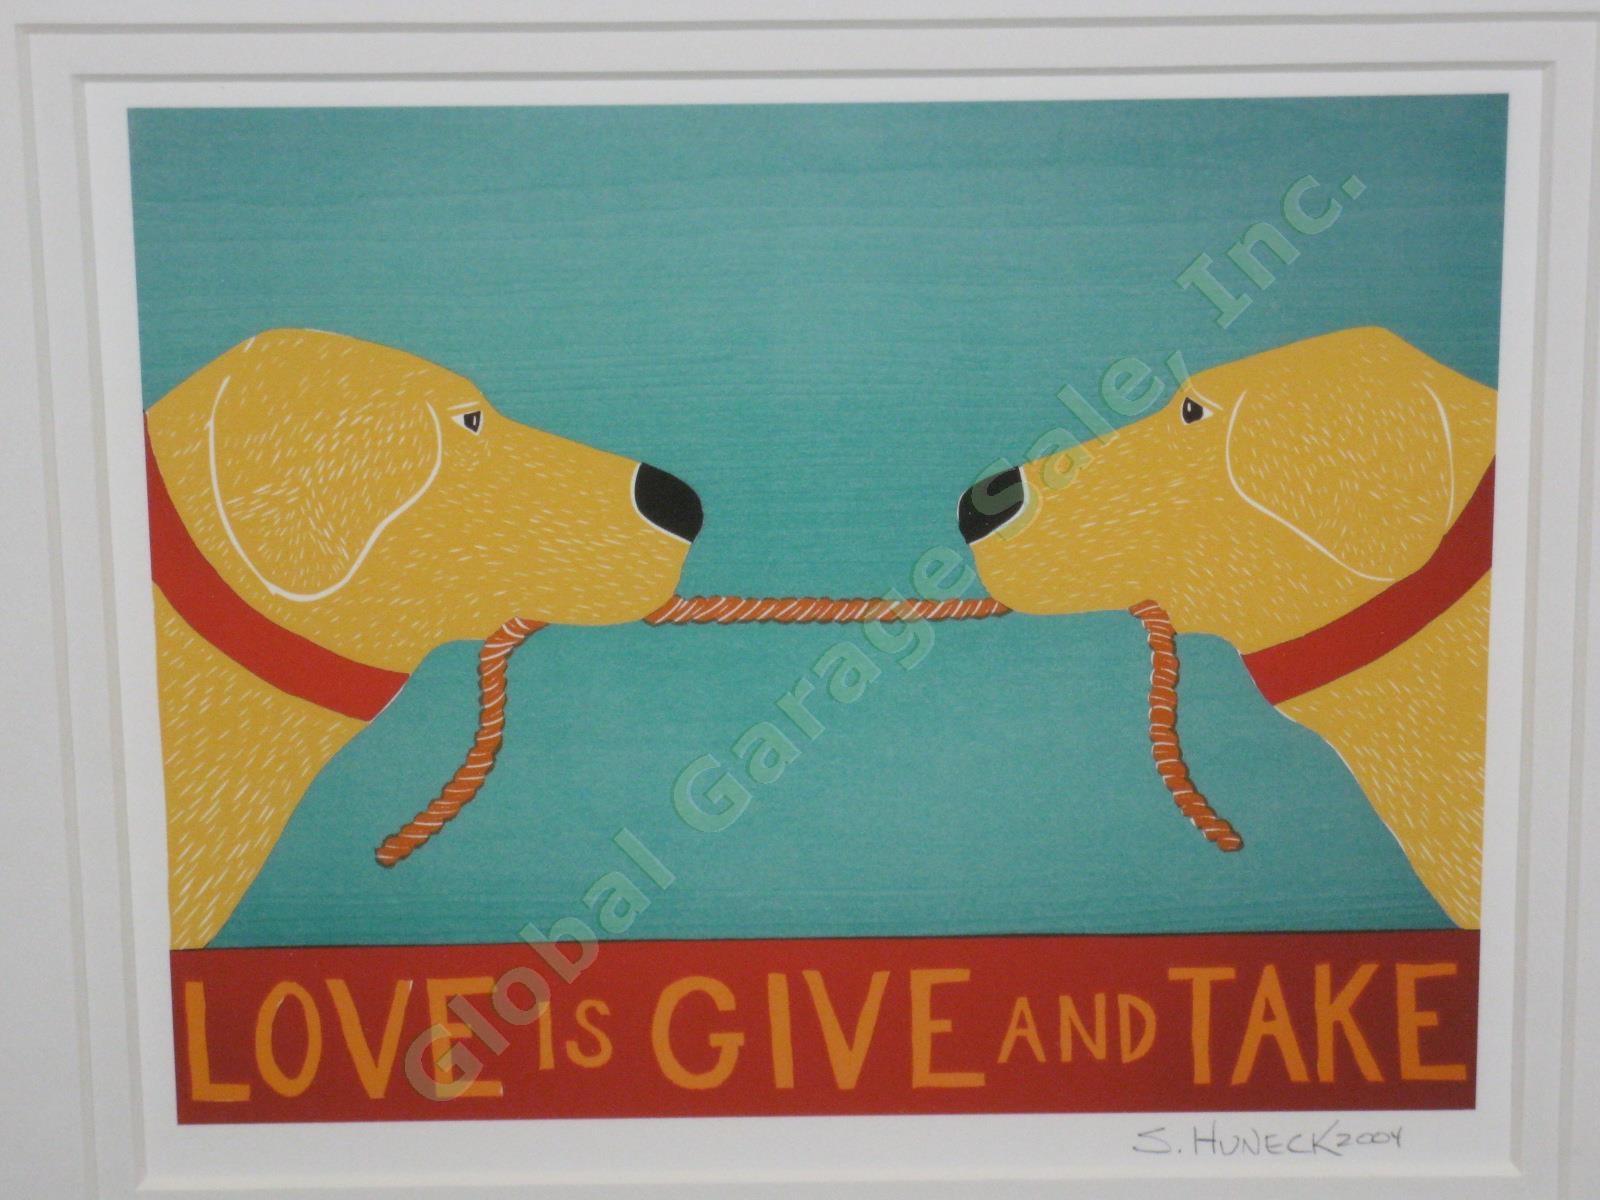 2004 Vermont Artist Stephen Huneck Signed Framed Dog Print Love Is Give And Take 1